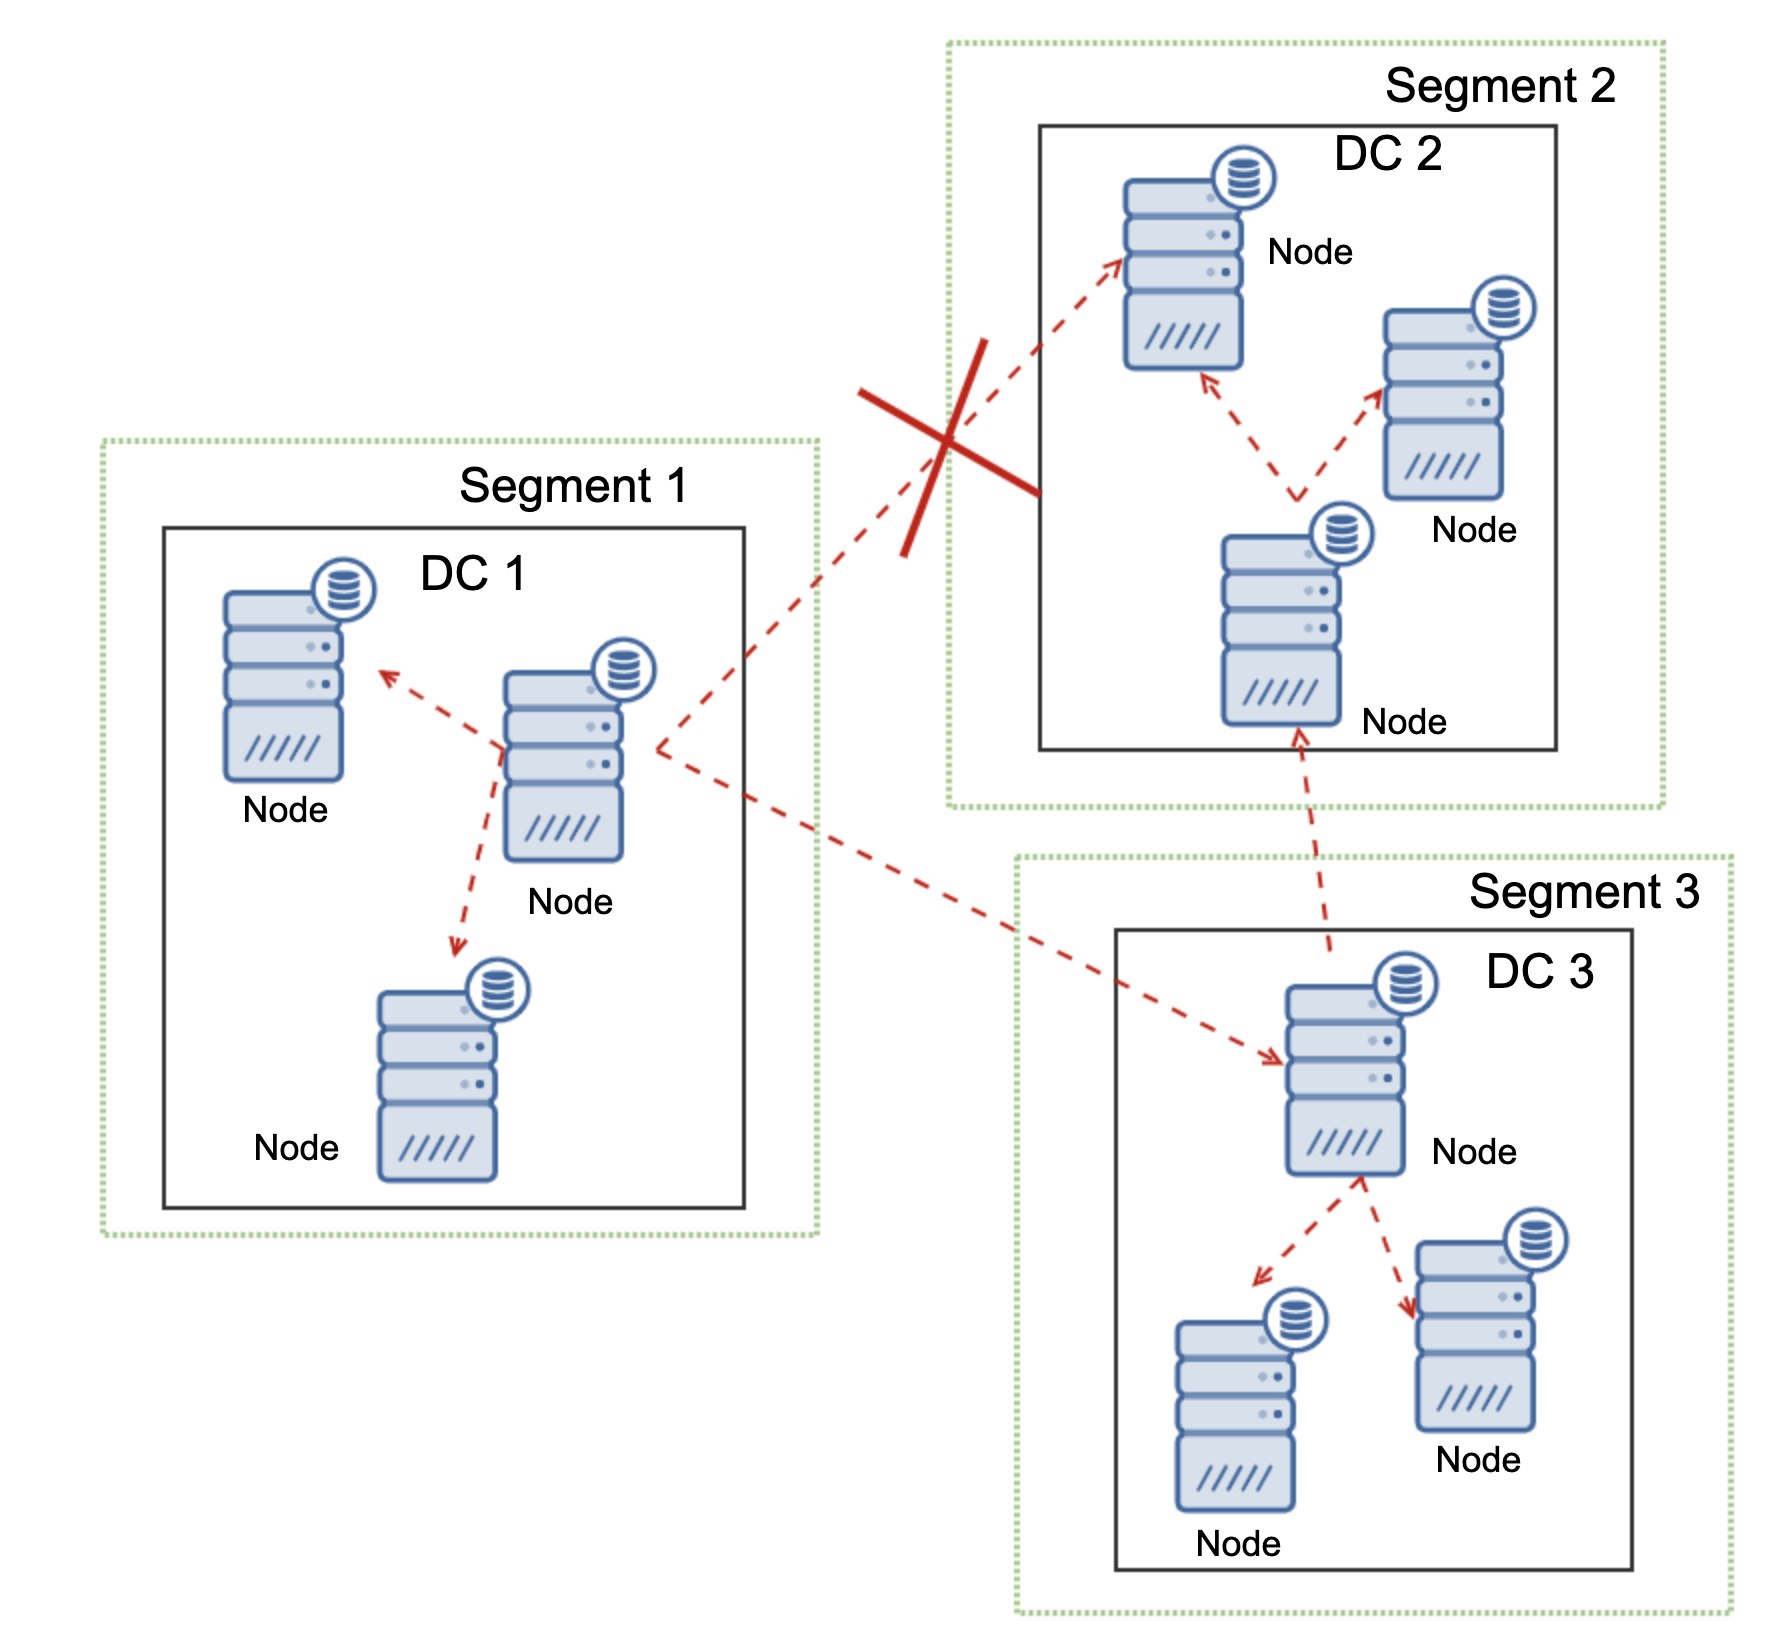 Why Use MariaDB Cluster for Geo-Distributed Environments?